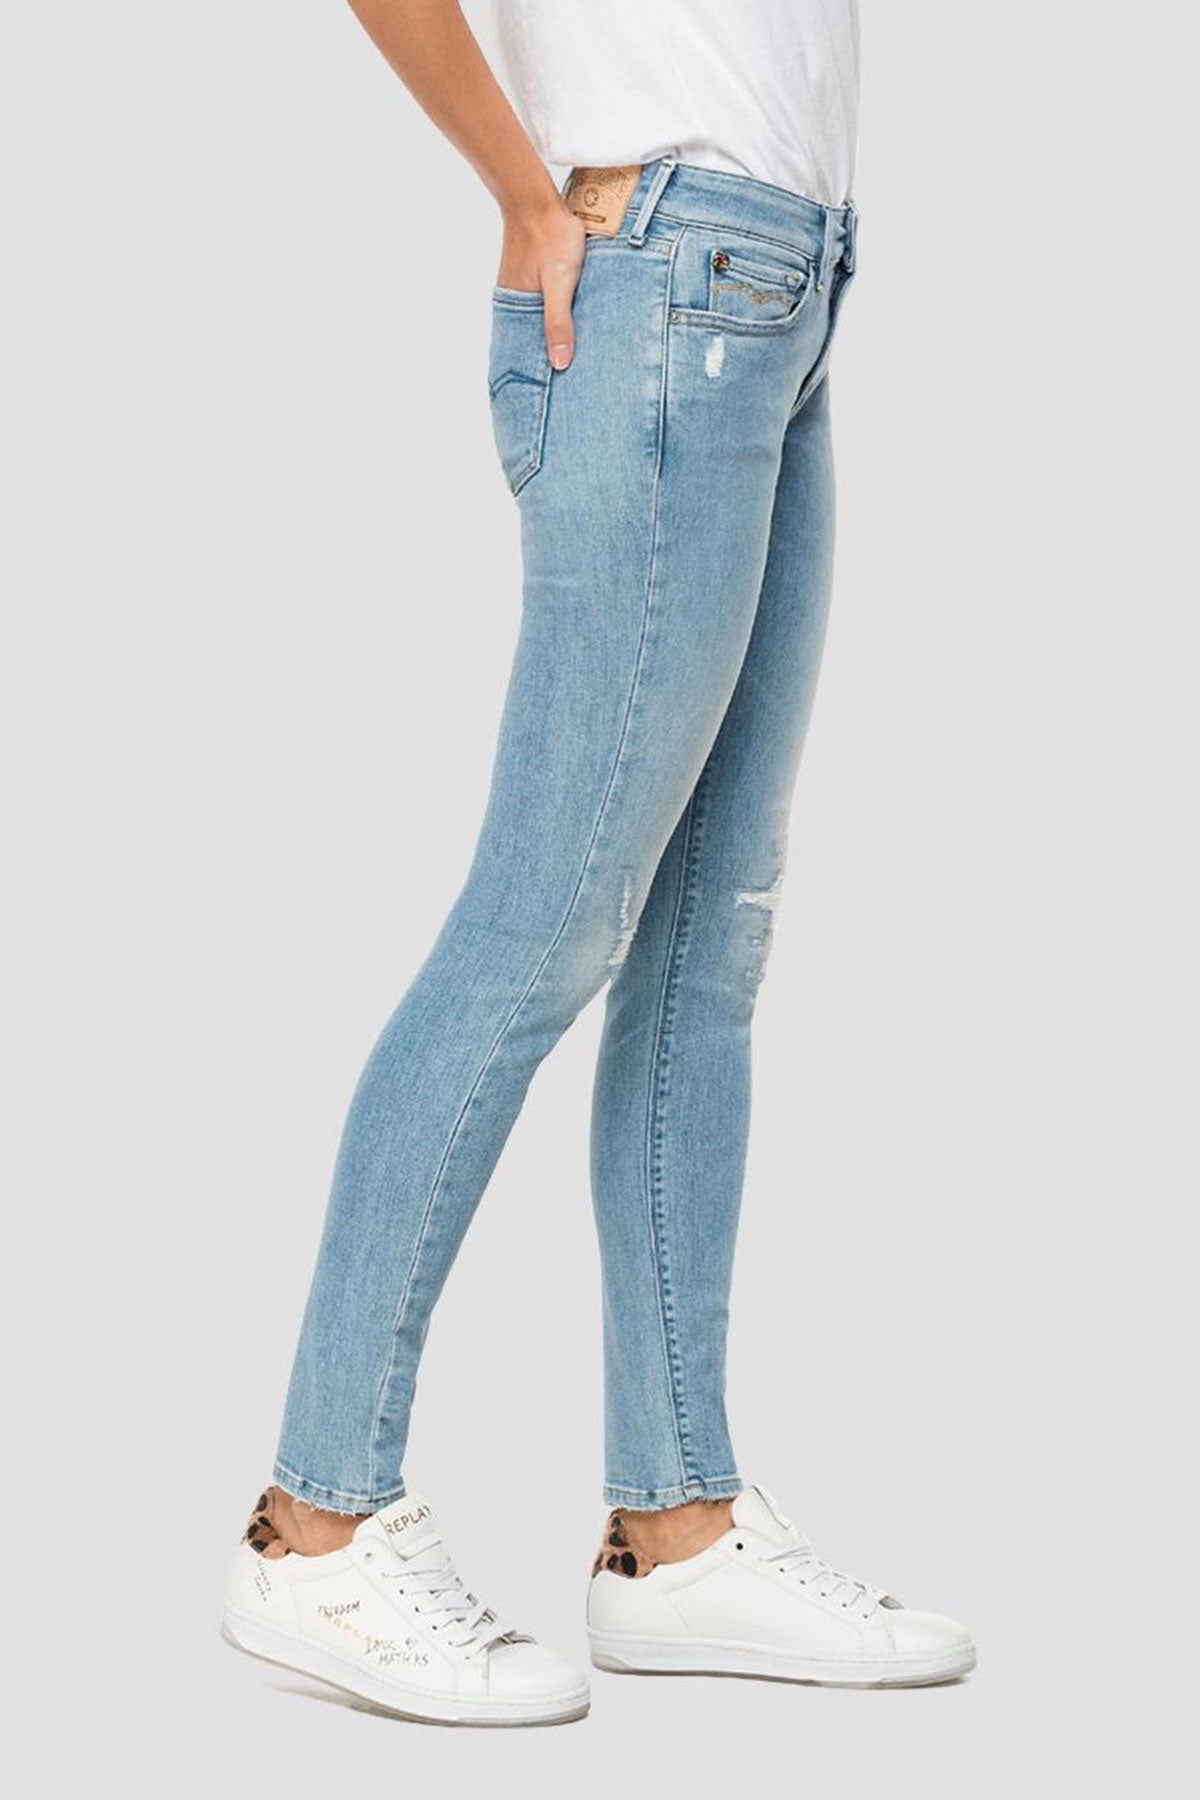 Replay Skinny High Waist Fit New Luz Jeans-Libas Trendy Fashion Store